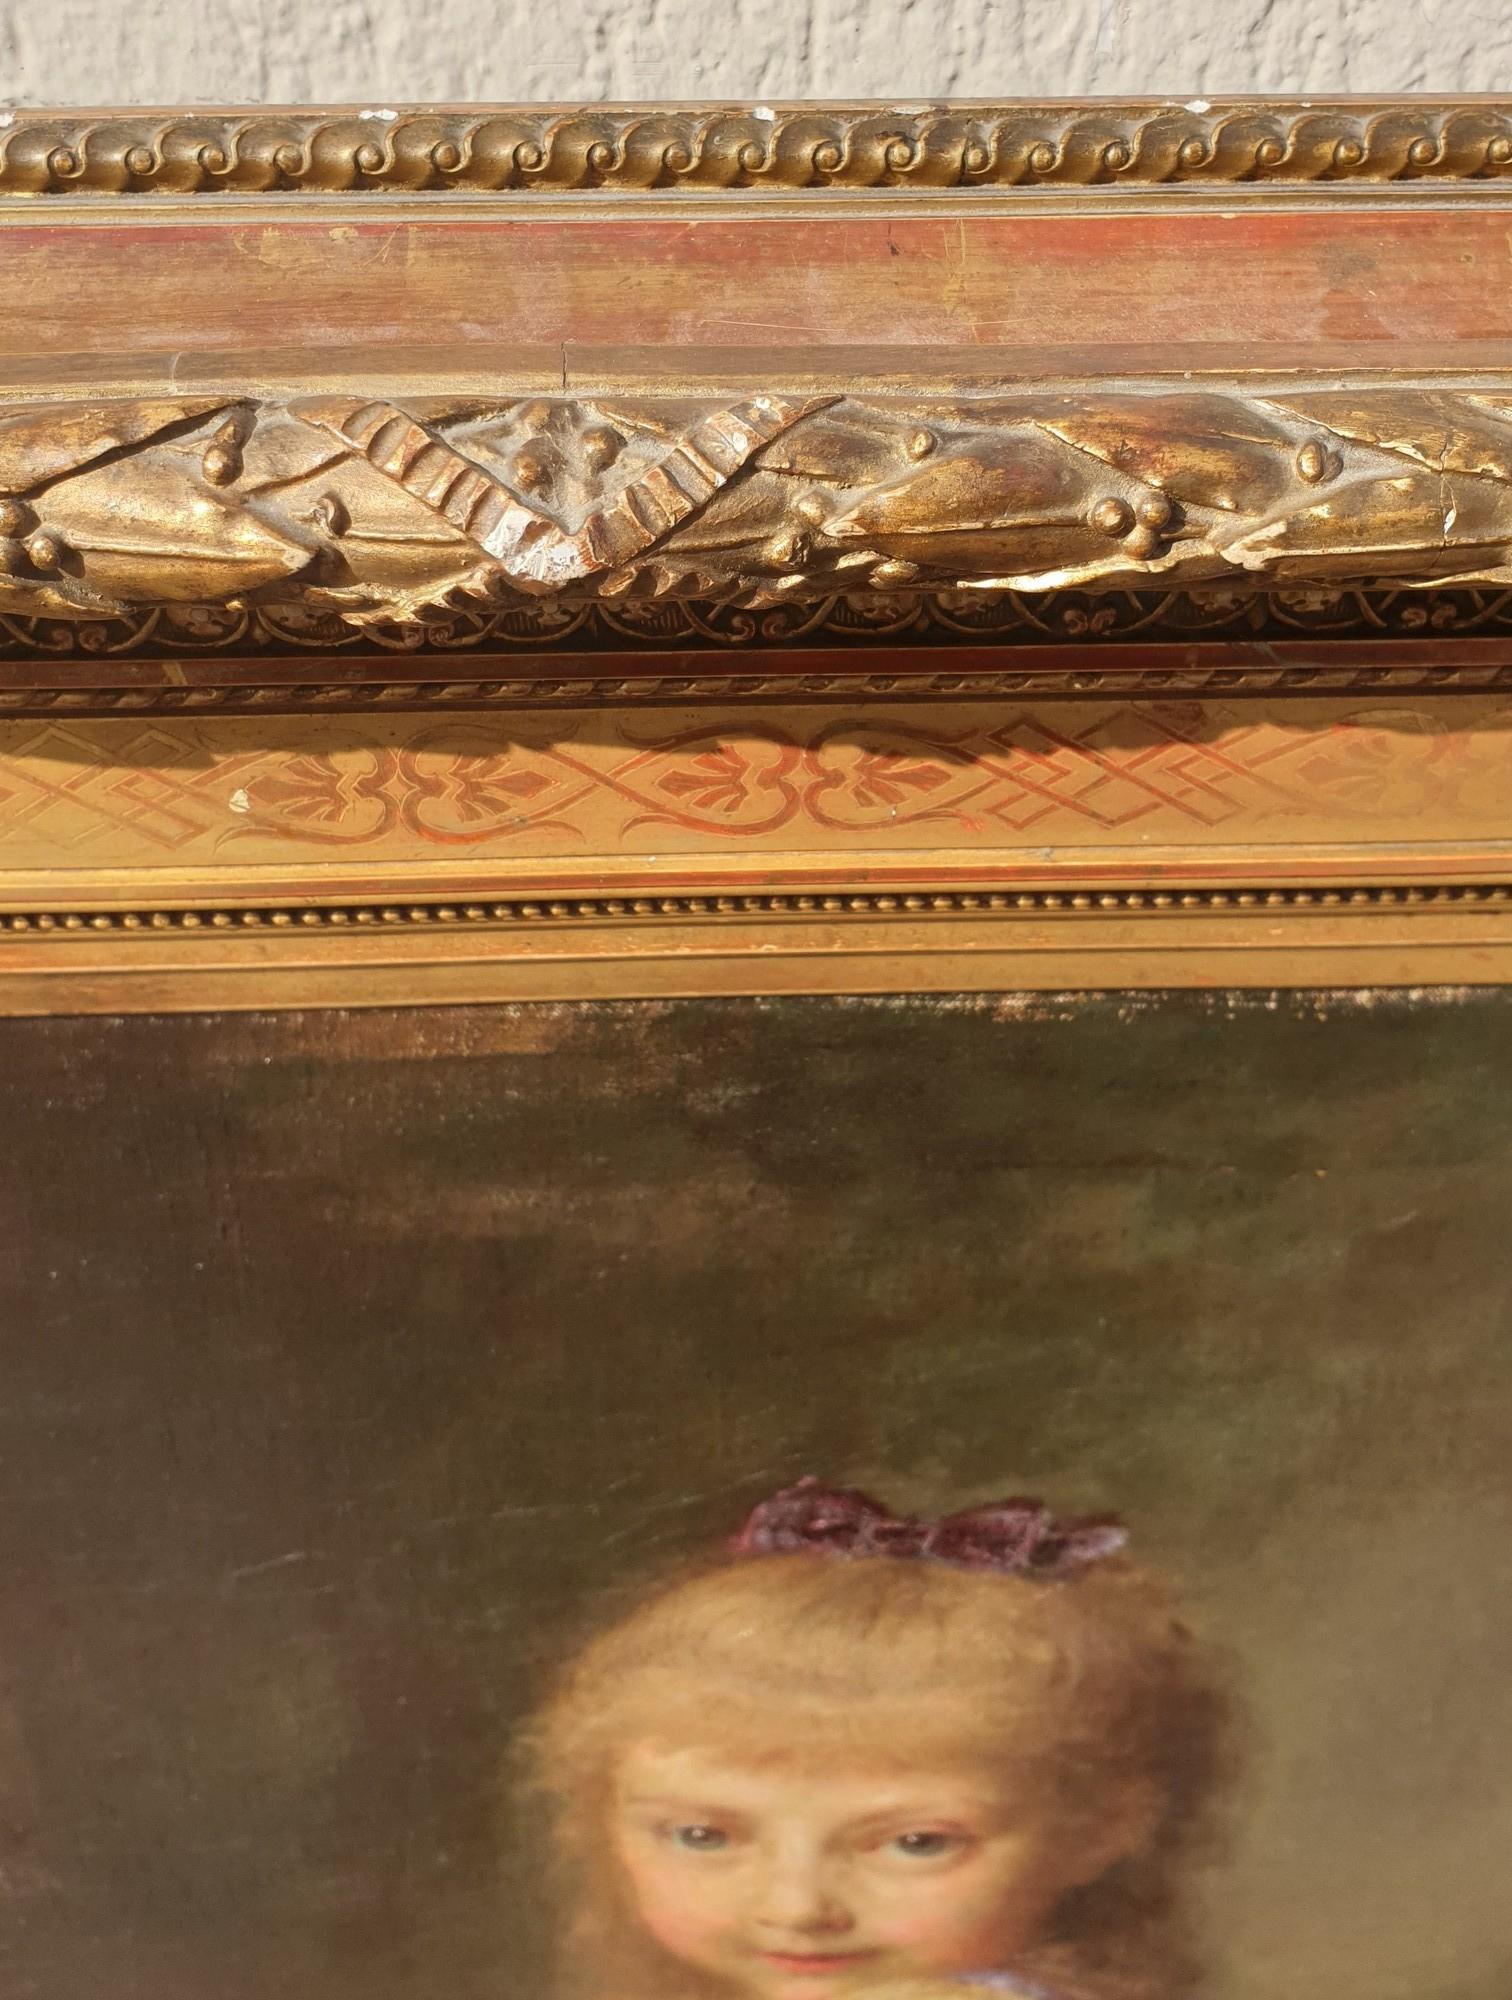 The Overturned Vase: large framed oil on canvas representing a little girl caught in the act of stupidity; she overturned a vase of flowers, water flows onto the table

Painting in beautiful colors, signed on the left Ingomar and dated 1873